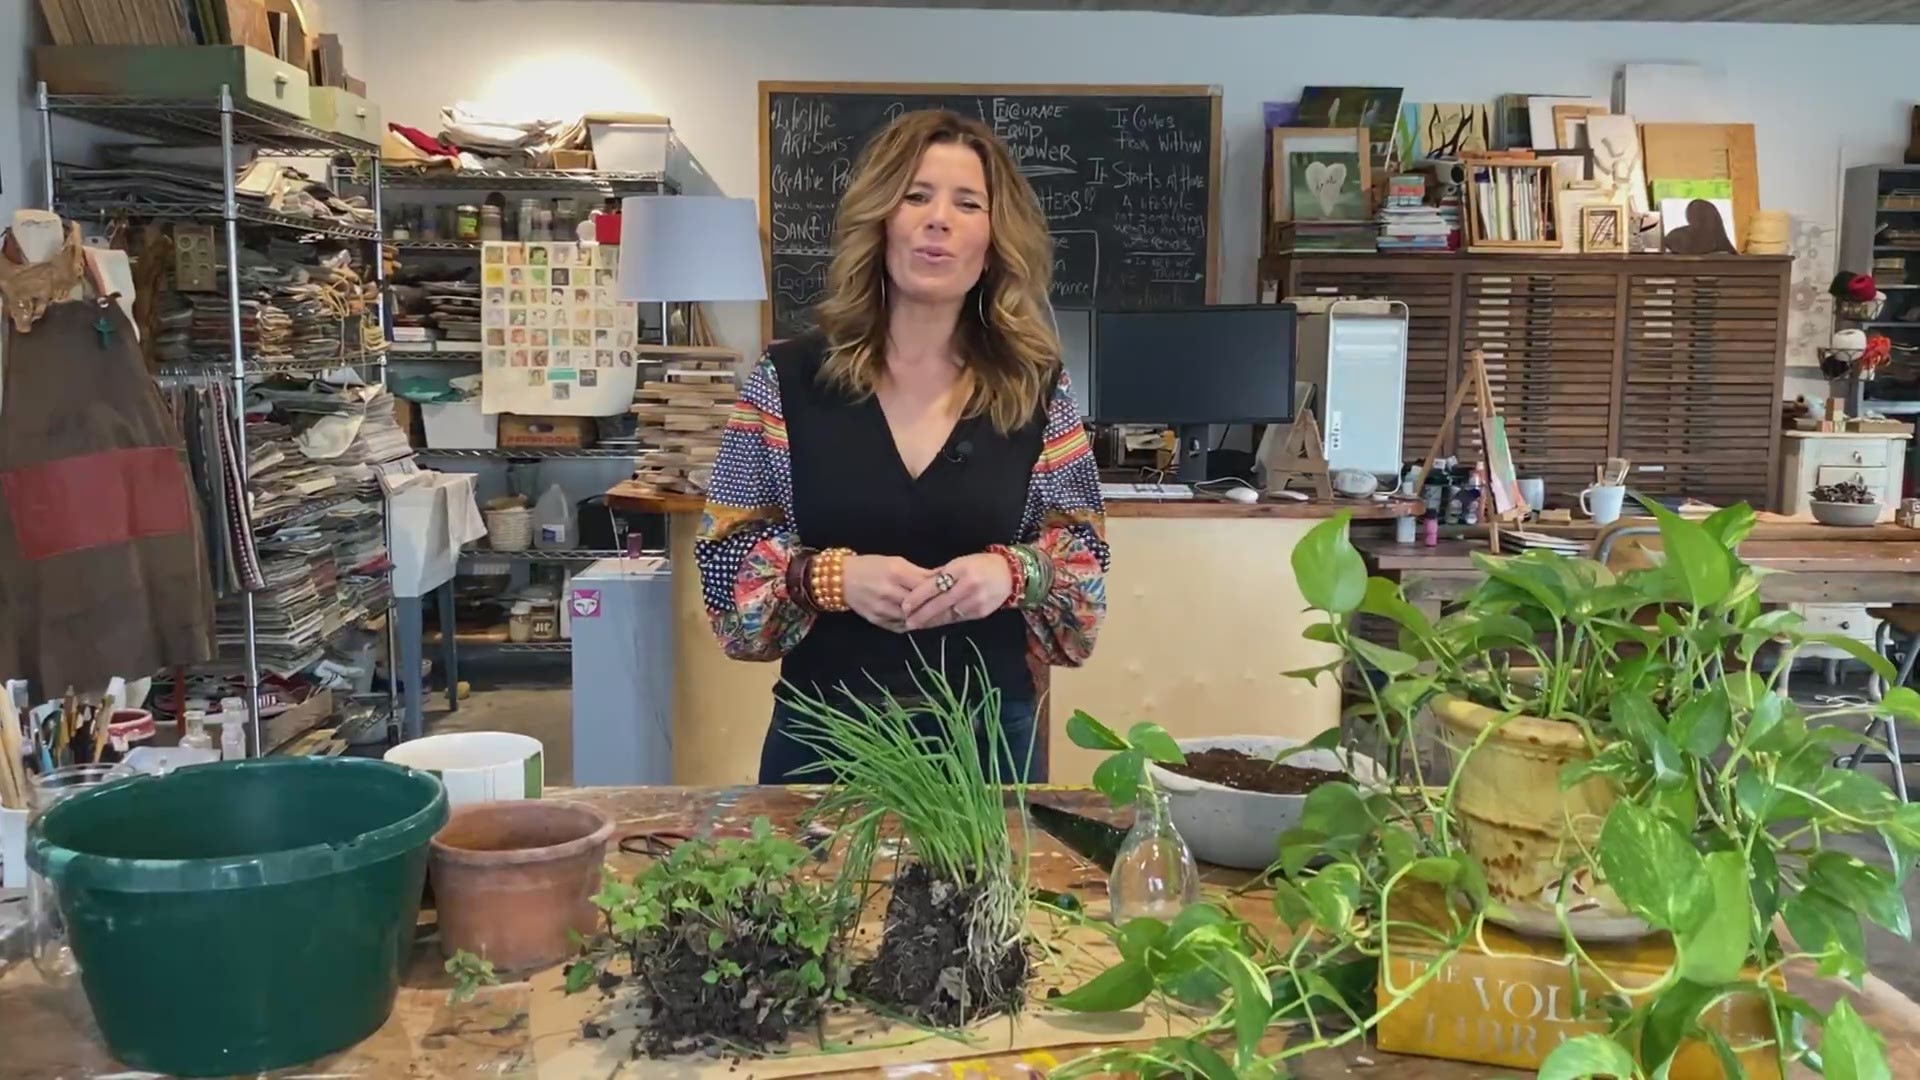 Iowa Live's Michelle Brown brings us another how-to video, this time addressing how you can spread some love around your neighborhood by sharing plants.